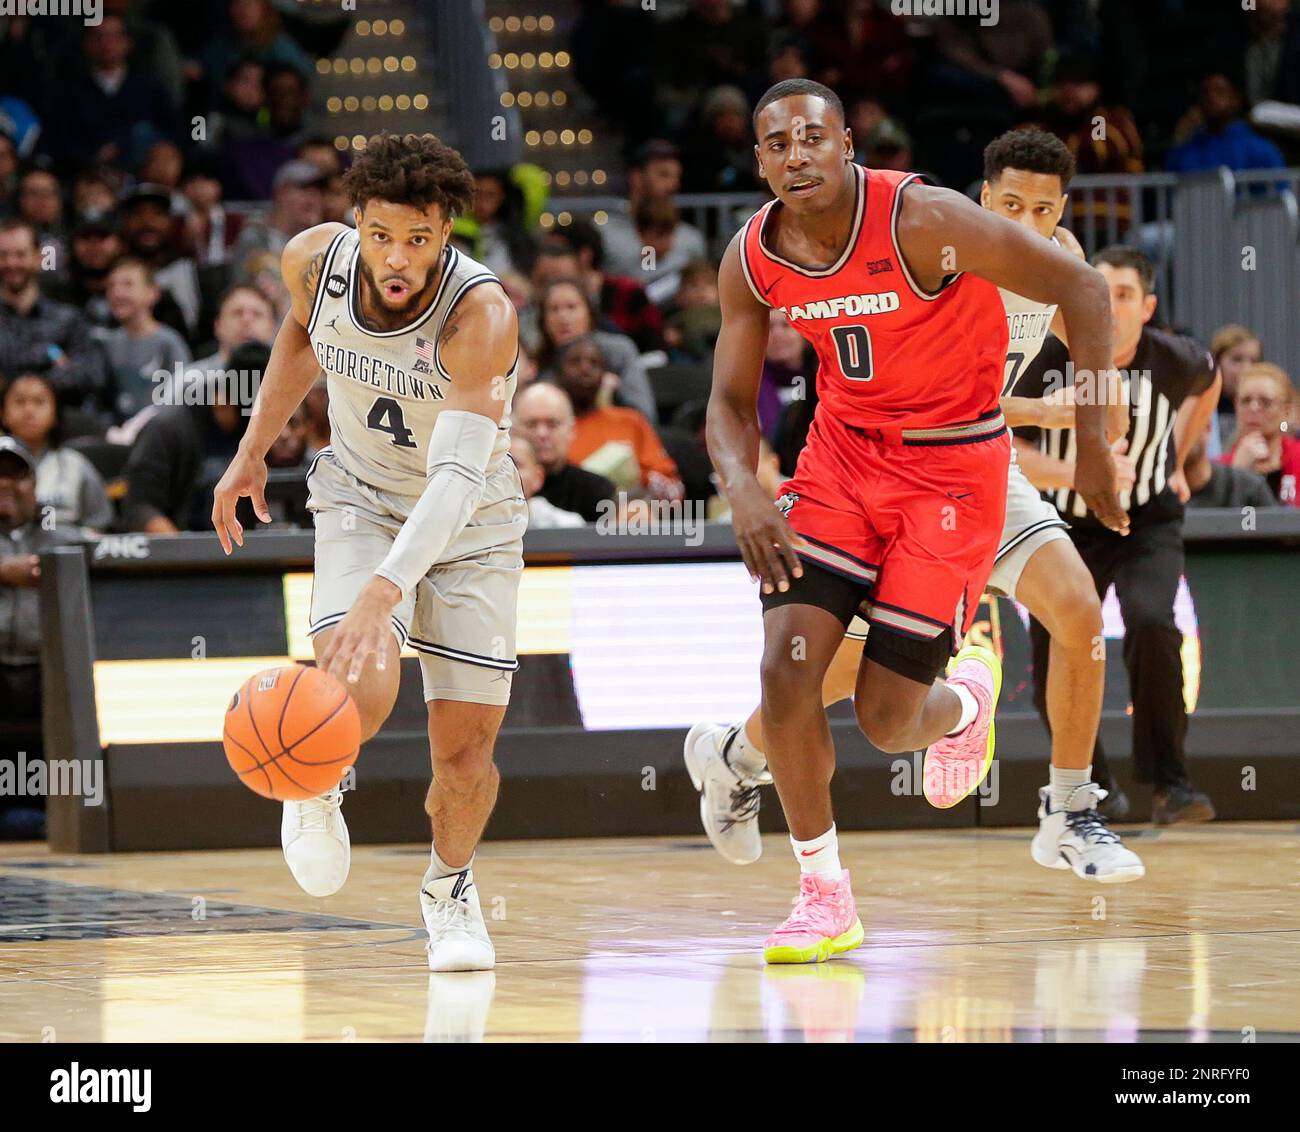 December 21, 2019: Georgetown Hoyas G (4) Jagan Mosely chases down the ball  during a NCAA Men's Basketball game between the Georgetown Hoyas and the  Samford Bulldogs at the Capital One Arena